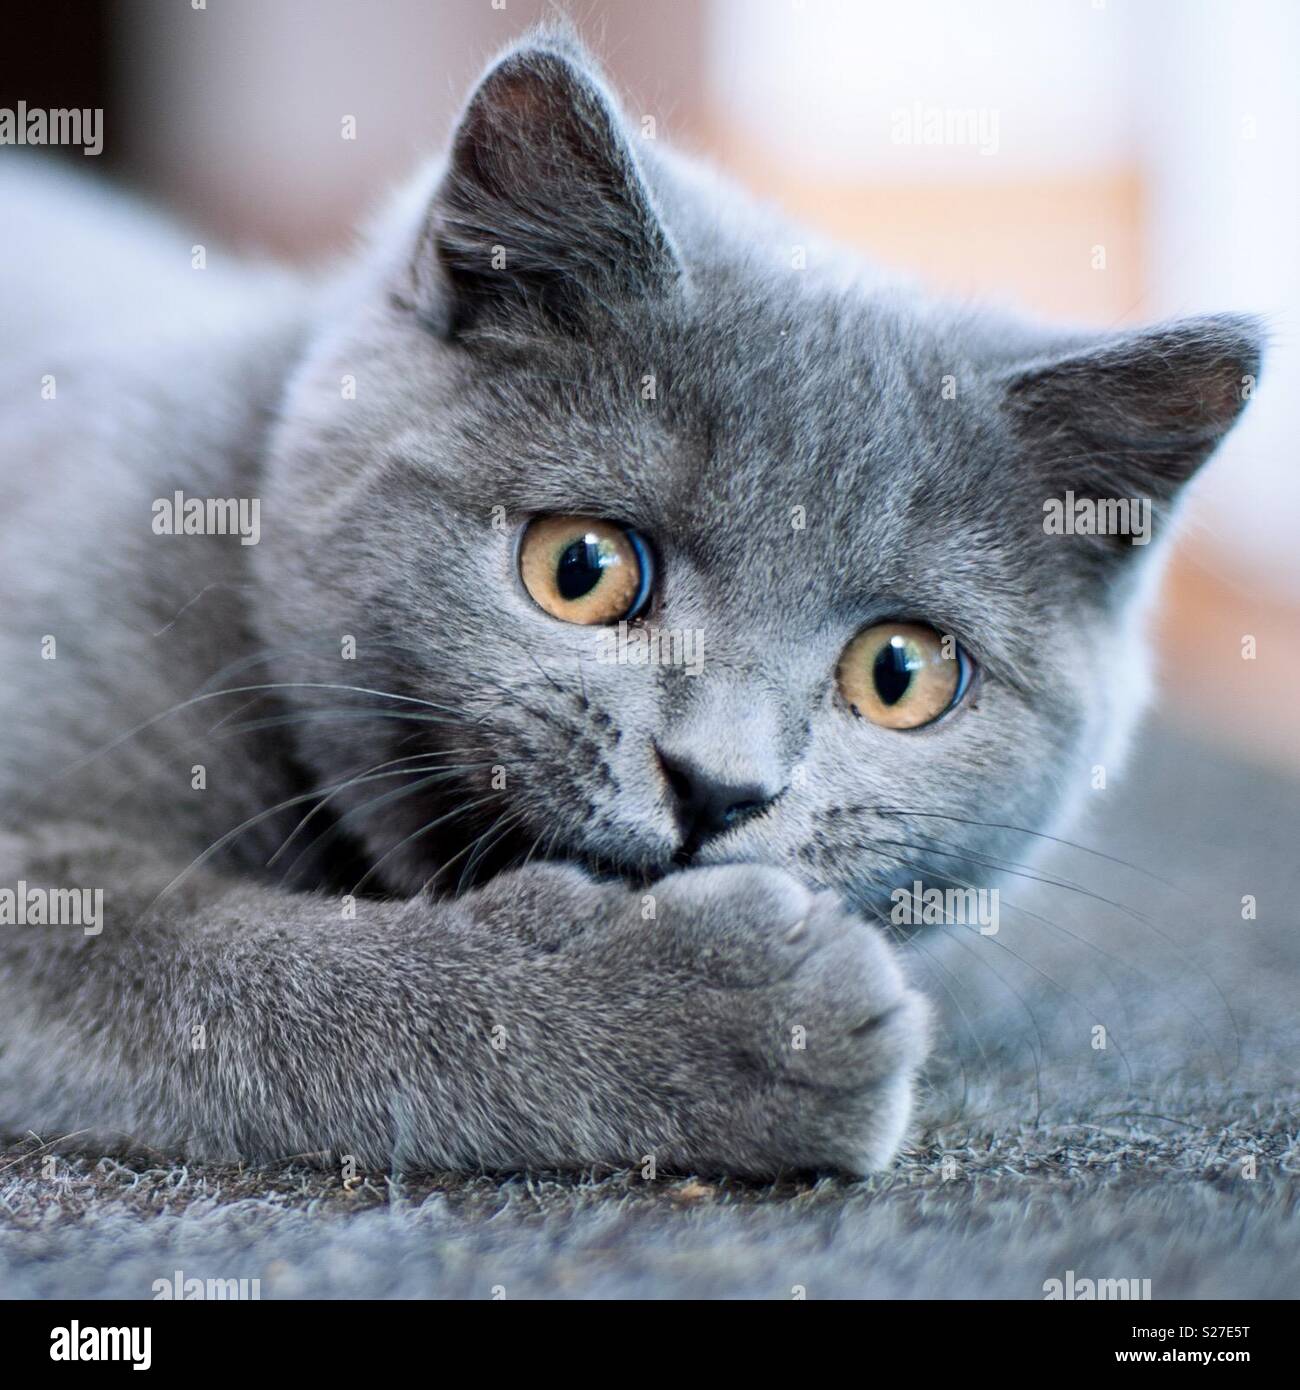 British blue shorthair kitten covering mouth with surprised embarrassed expression on a rug with natural light. Stock Photo